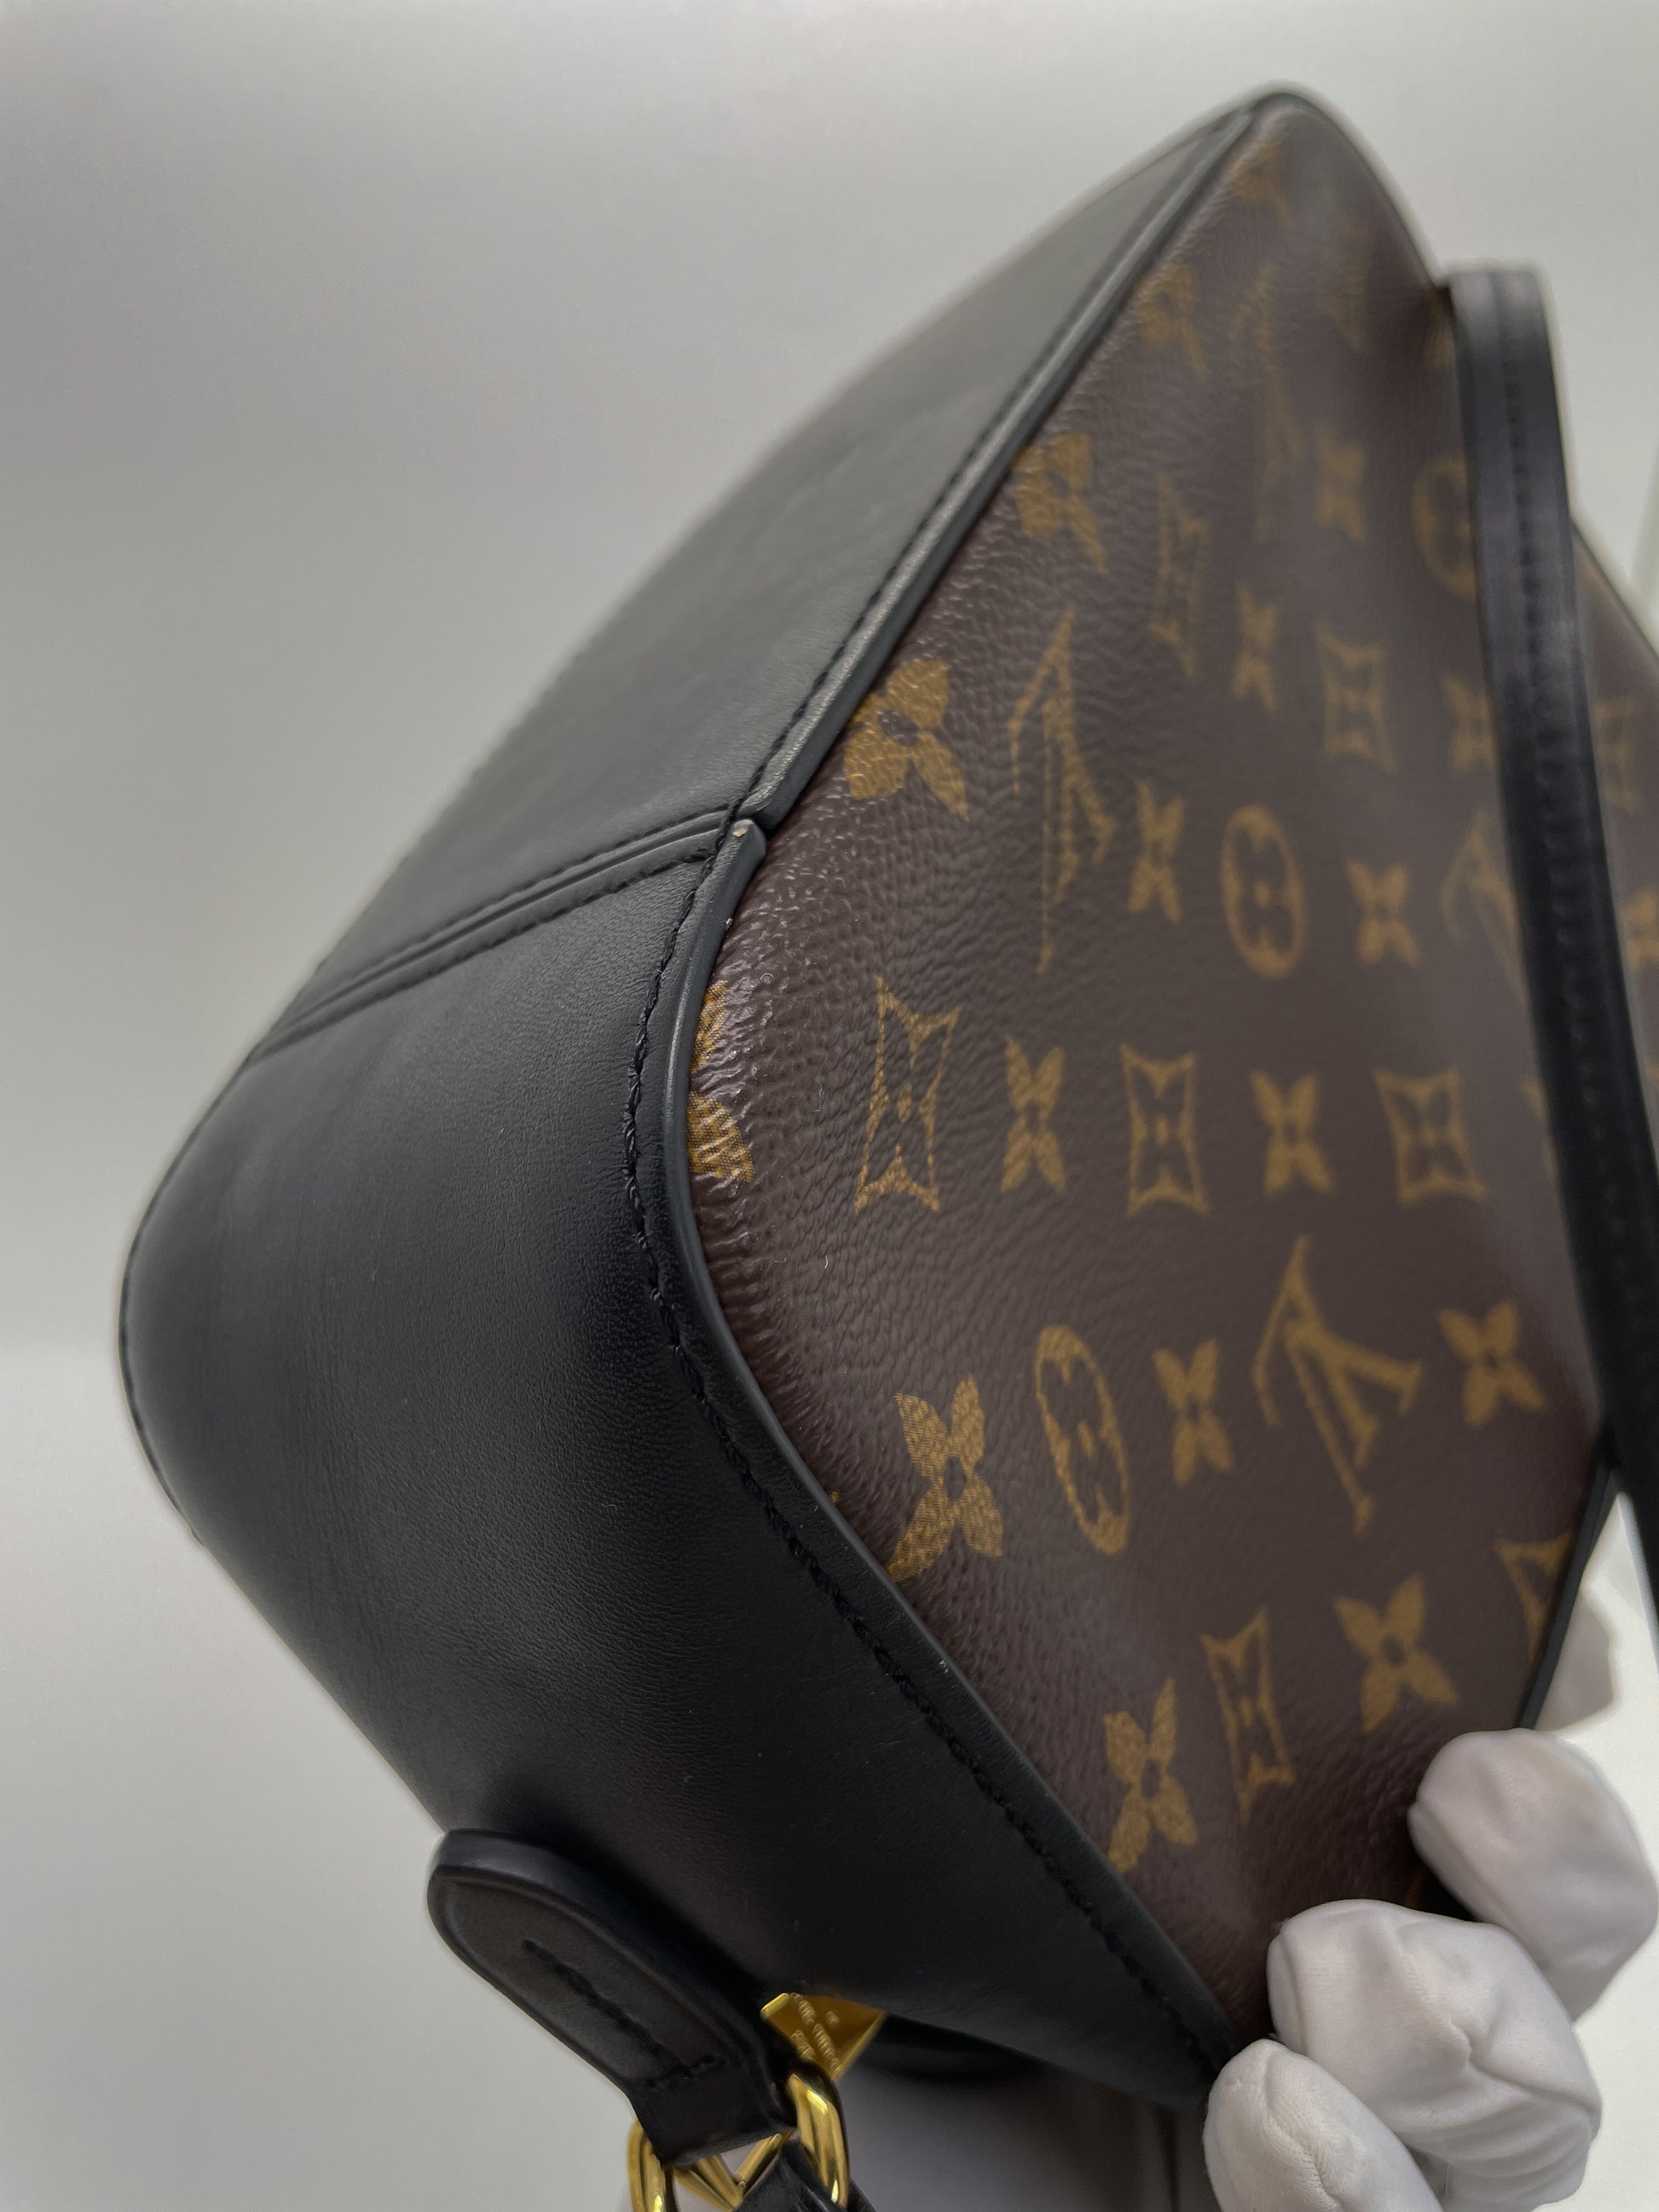 Why Are Louis Vuitton Bags So Popular and Expensive – Bagaholic